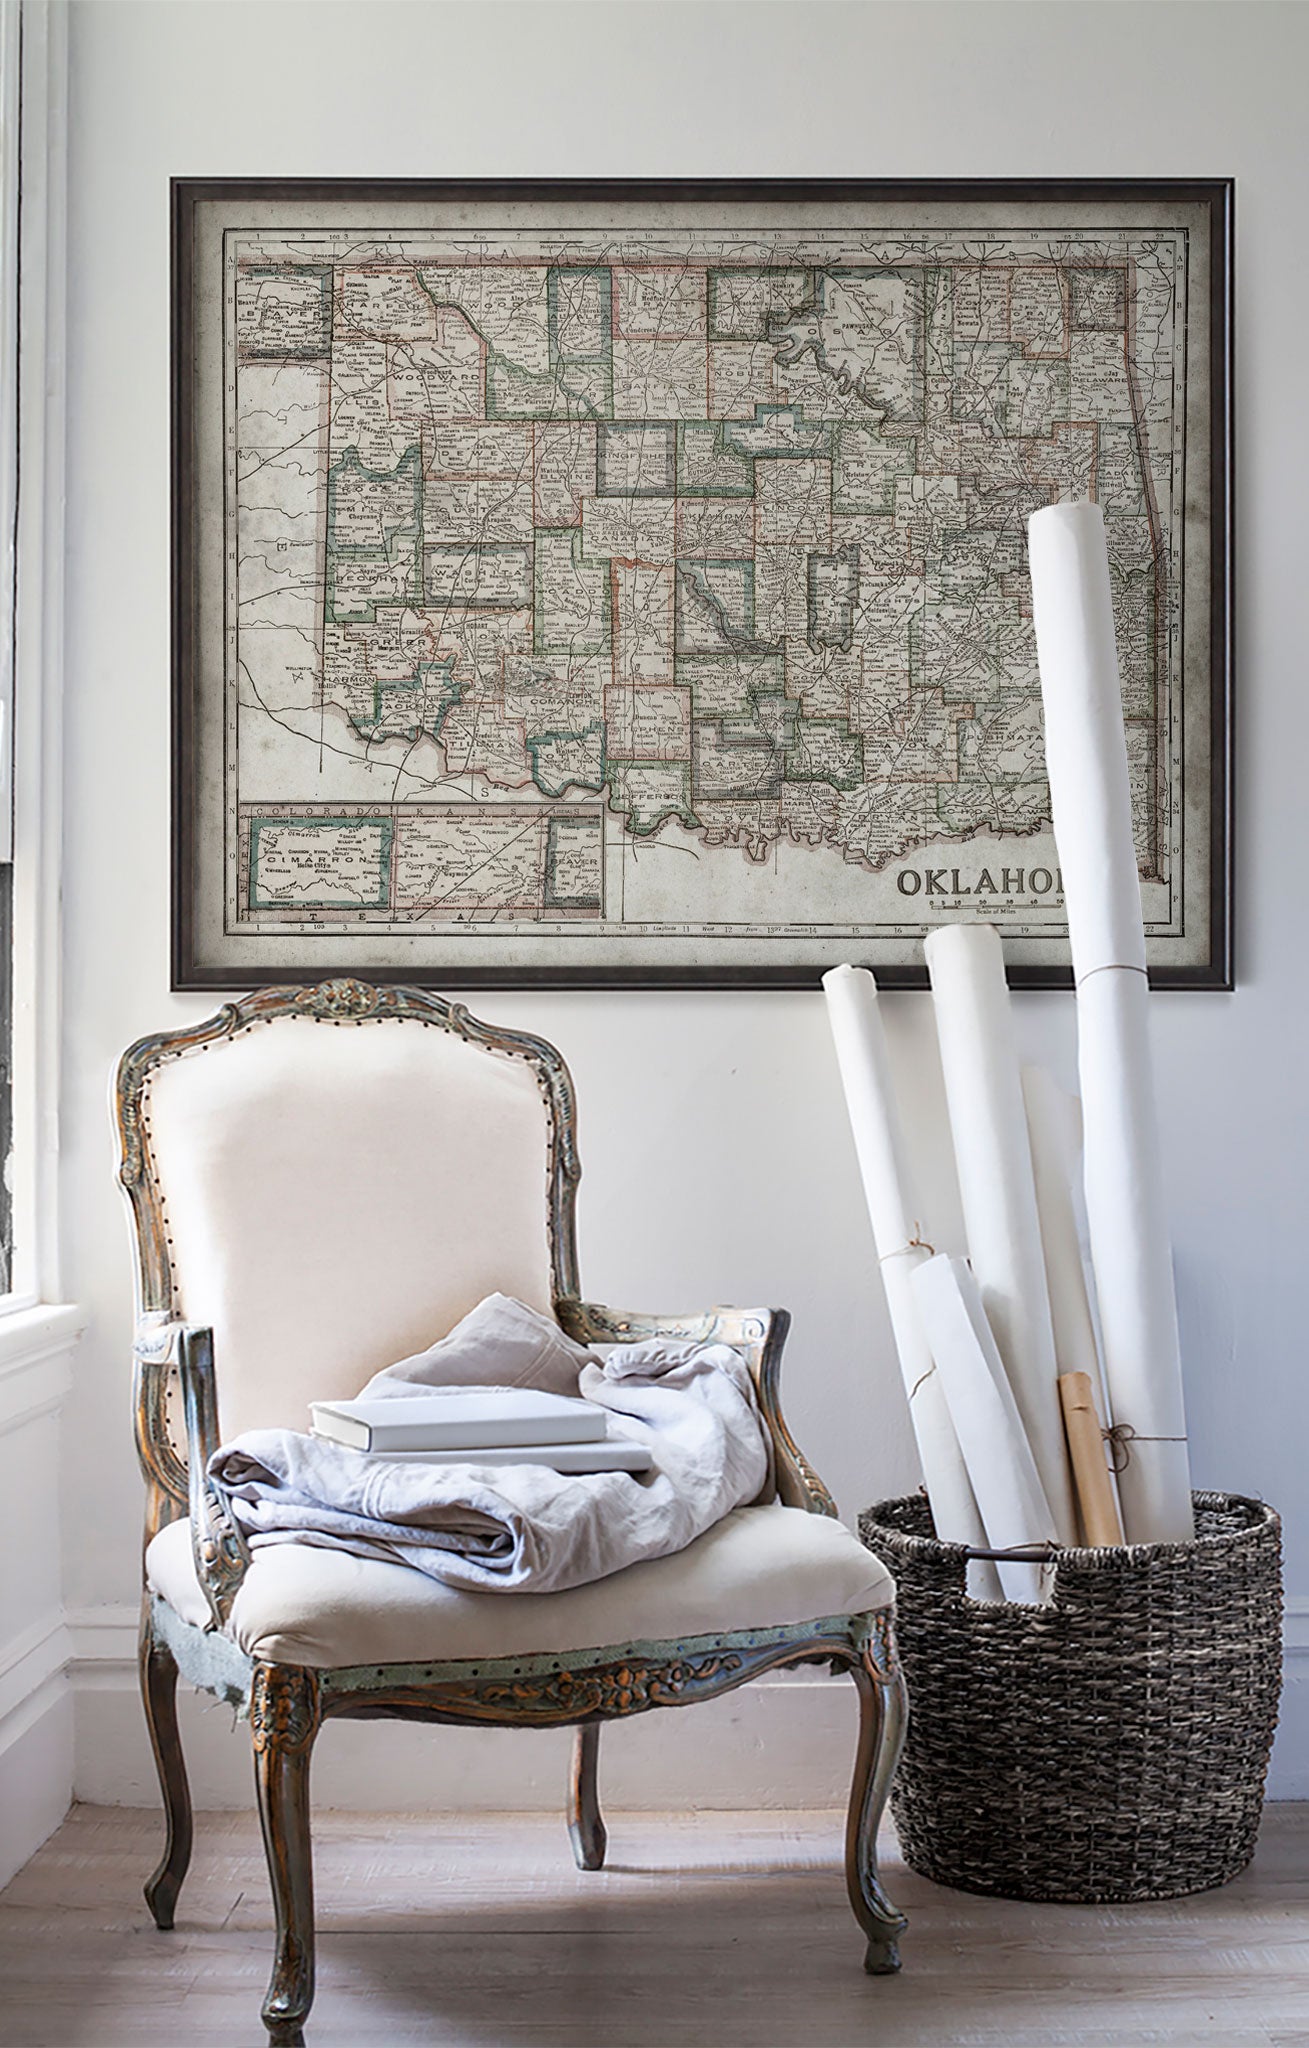 Vintage historic map of Oklahoma in room with white walls with vintage furniture and vintage decor.